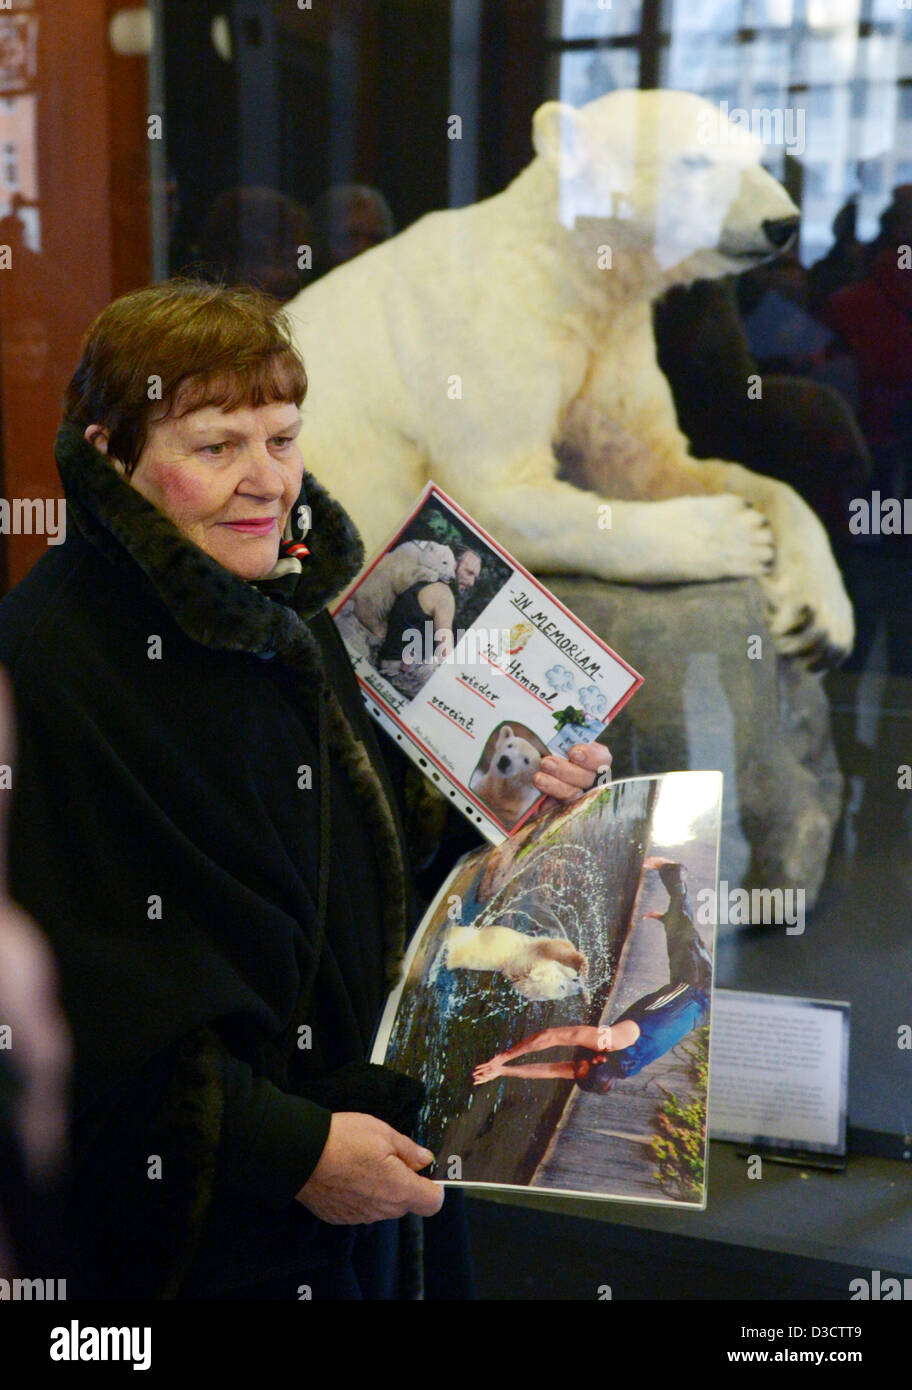 Erika Doerflein, mother of Knut's deceased zookeeper, poses  next to a model of polar bear Knut at the Museum of Natural History in Berlin, Germany, 16 February 2013. According to reports, Knut's body was not stuffed, but his fur was used in the sculpture. The polar bear is exhibited at the museum for one month from 16 February. Knut achieved world-wide fame in Berlin Zoo until his untimely death in 2011. Photo: Rainer Jensen Stock Photo